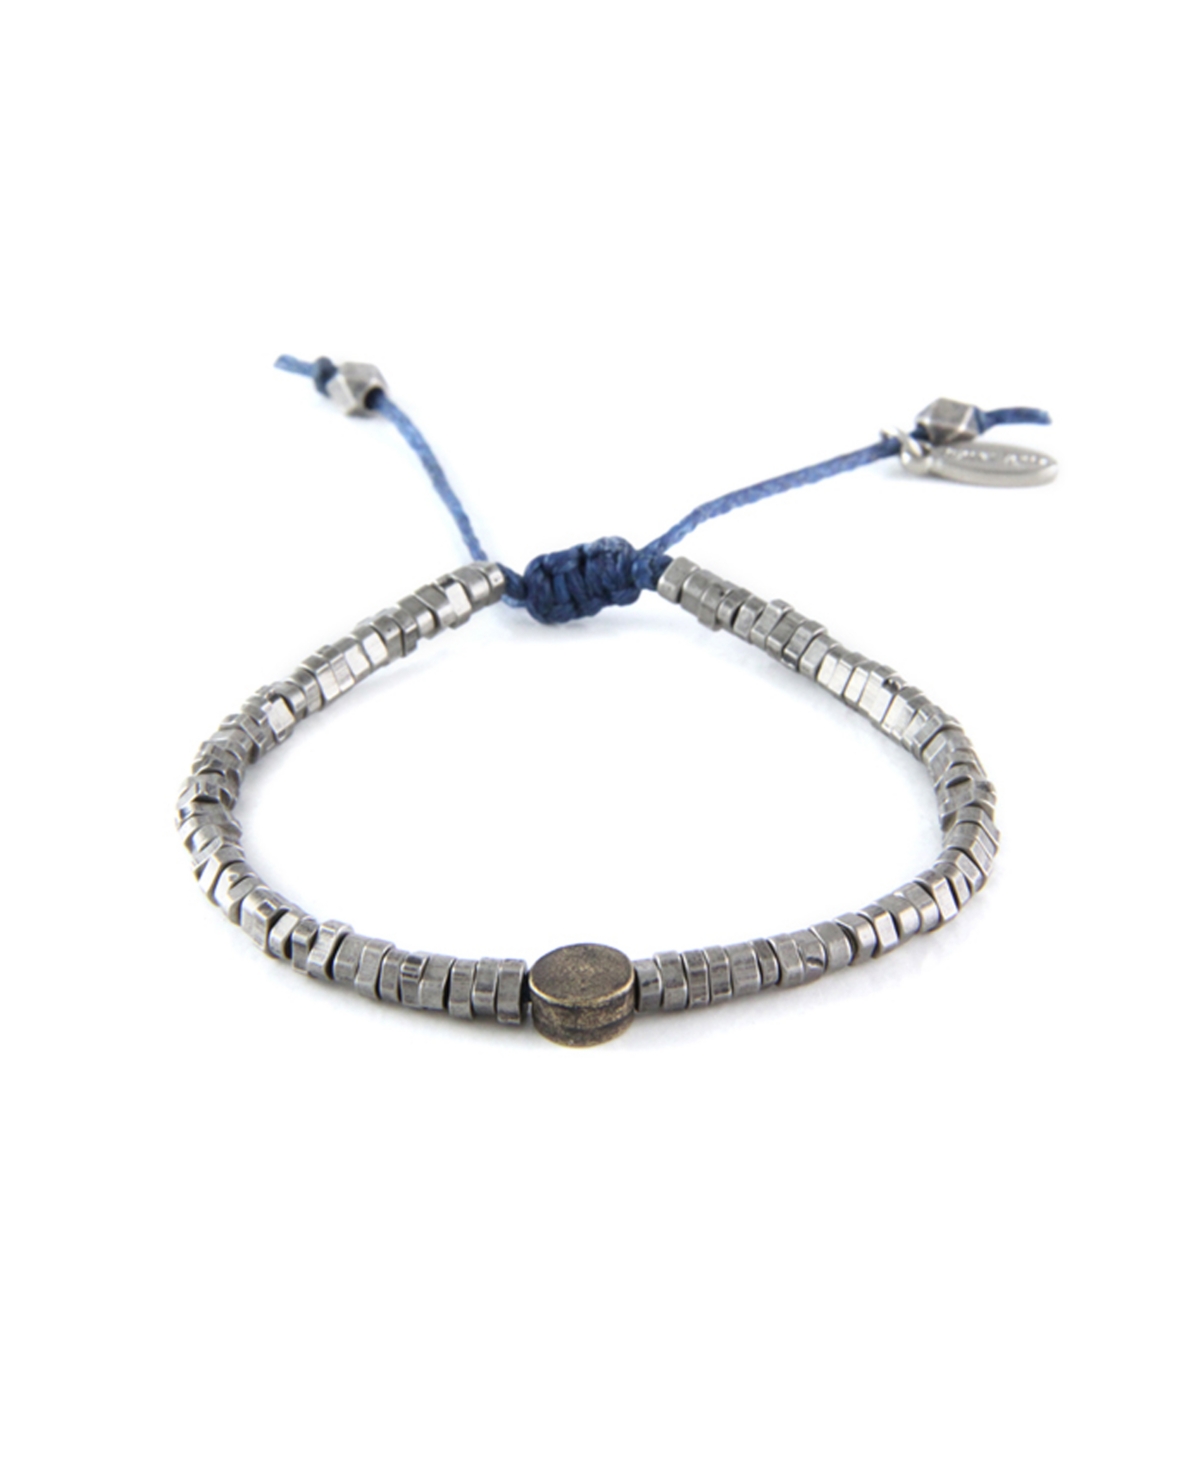 Mixed Metal Adjustable Bracelet with Cord - Silver Plated